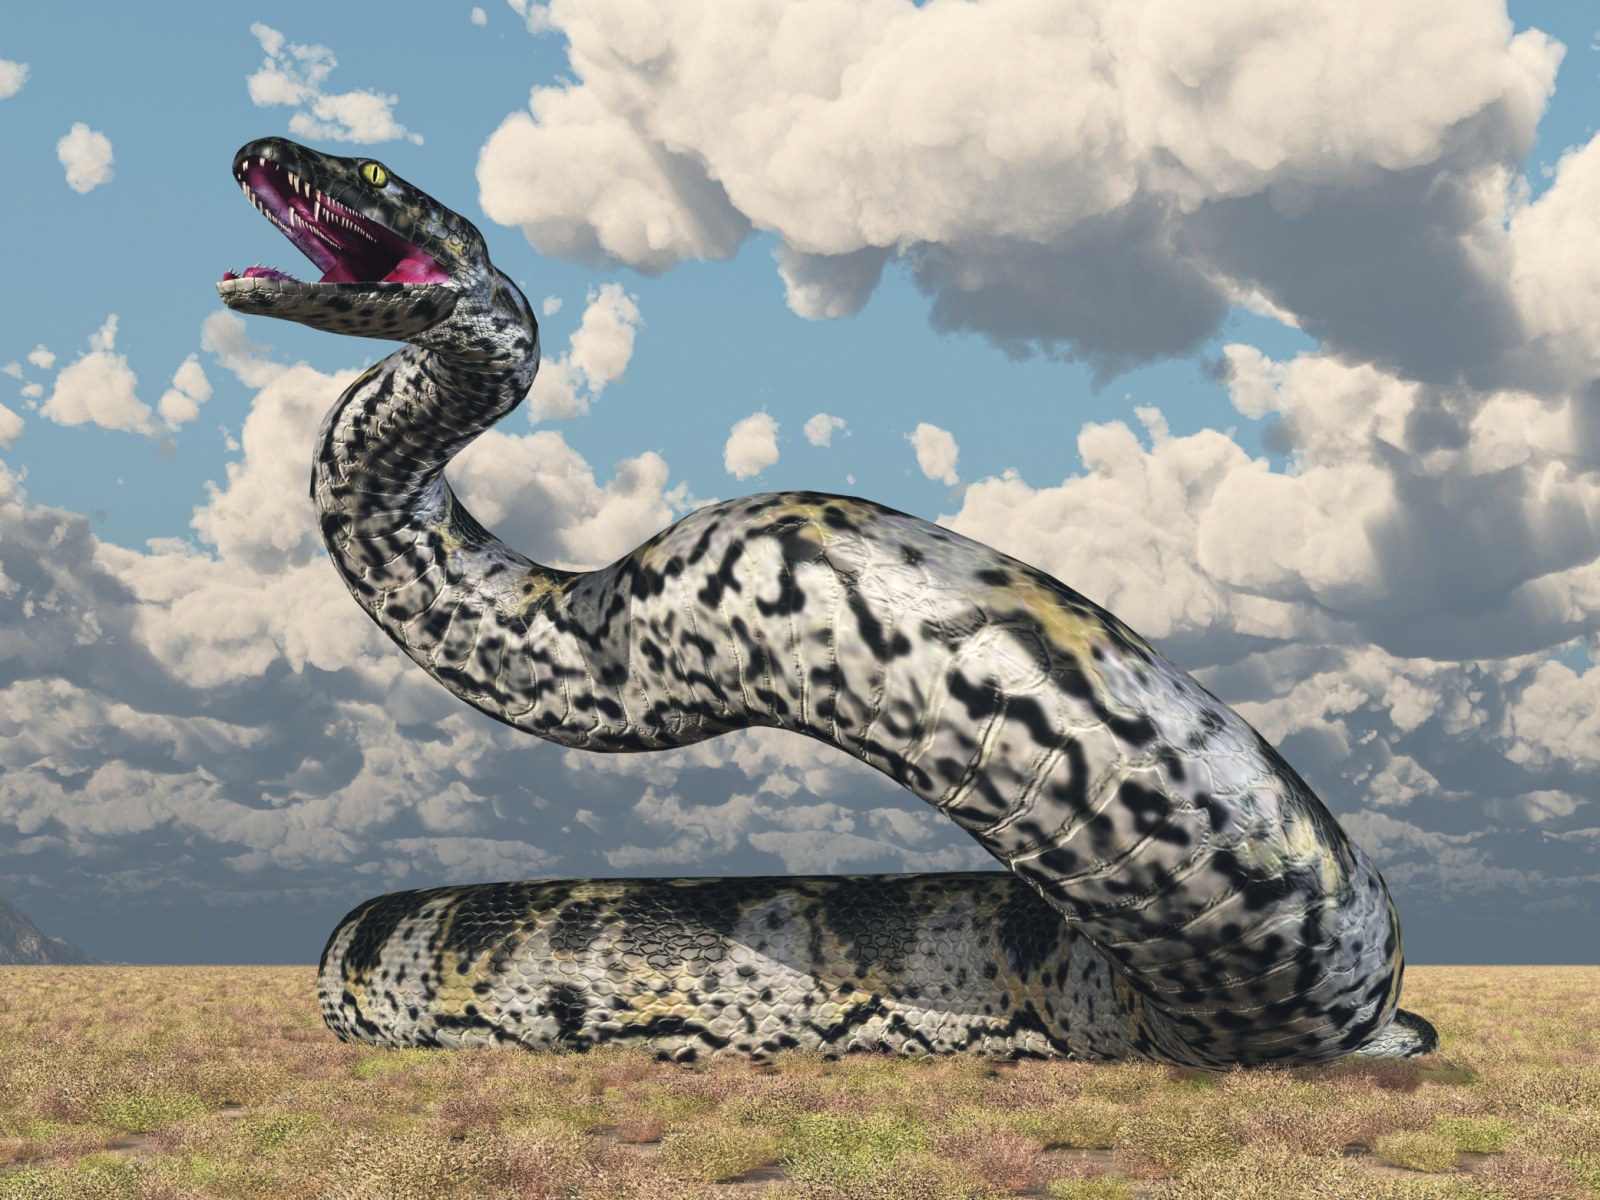 What Is the Largest Snake That Ever Existed?